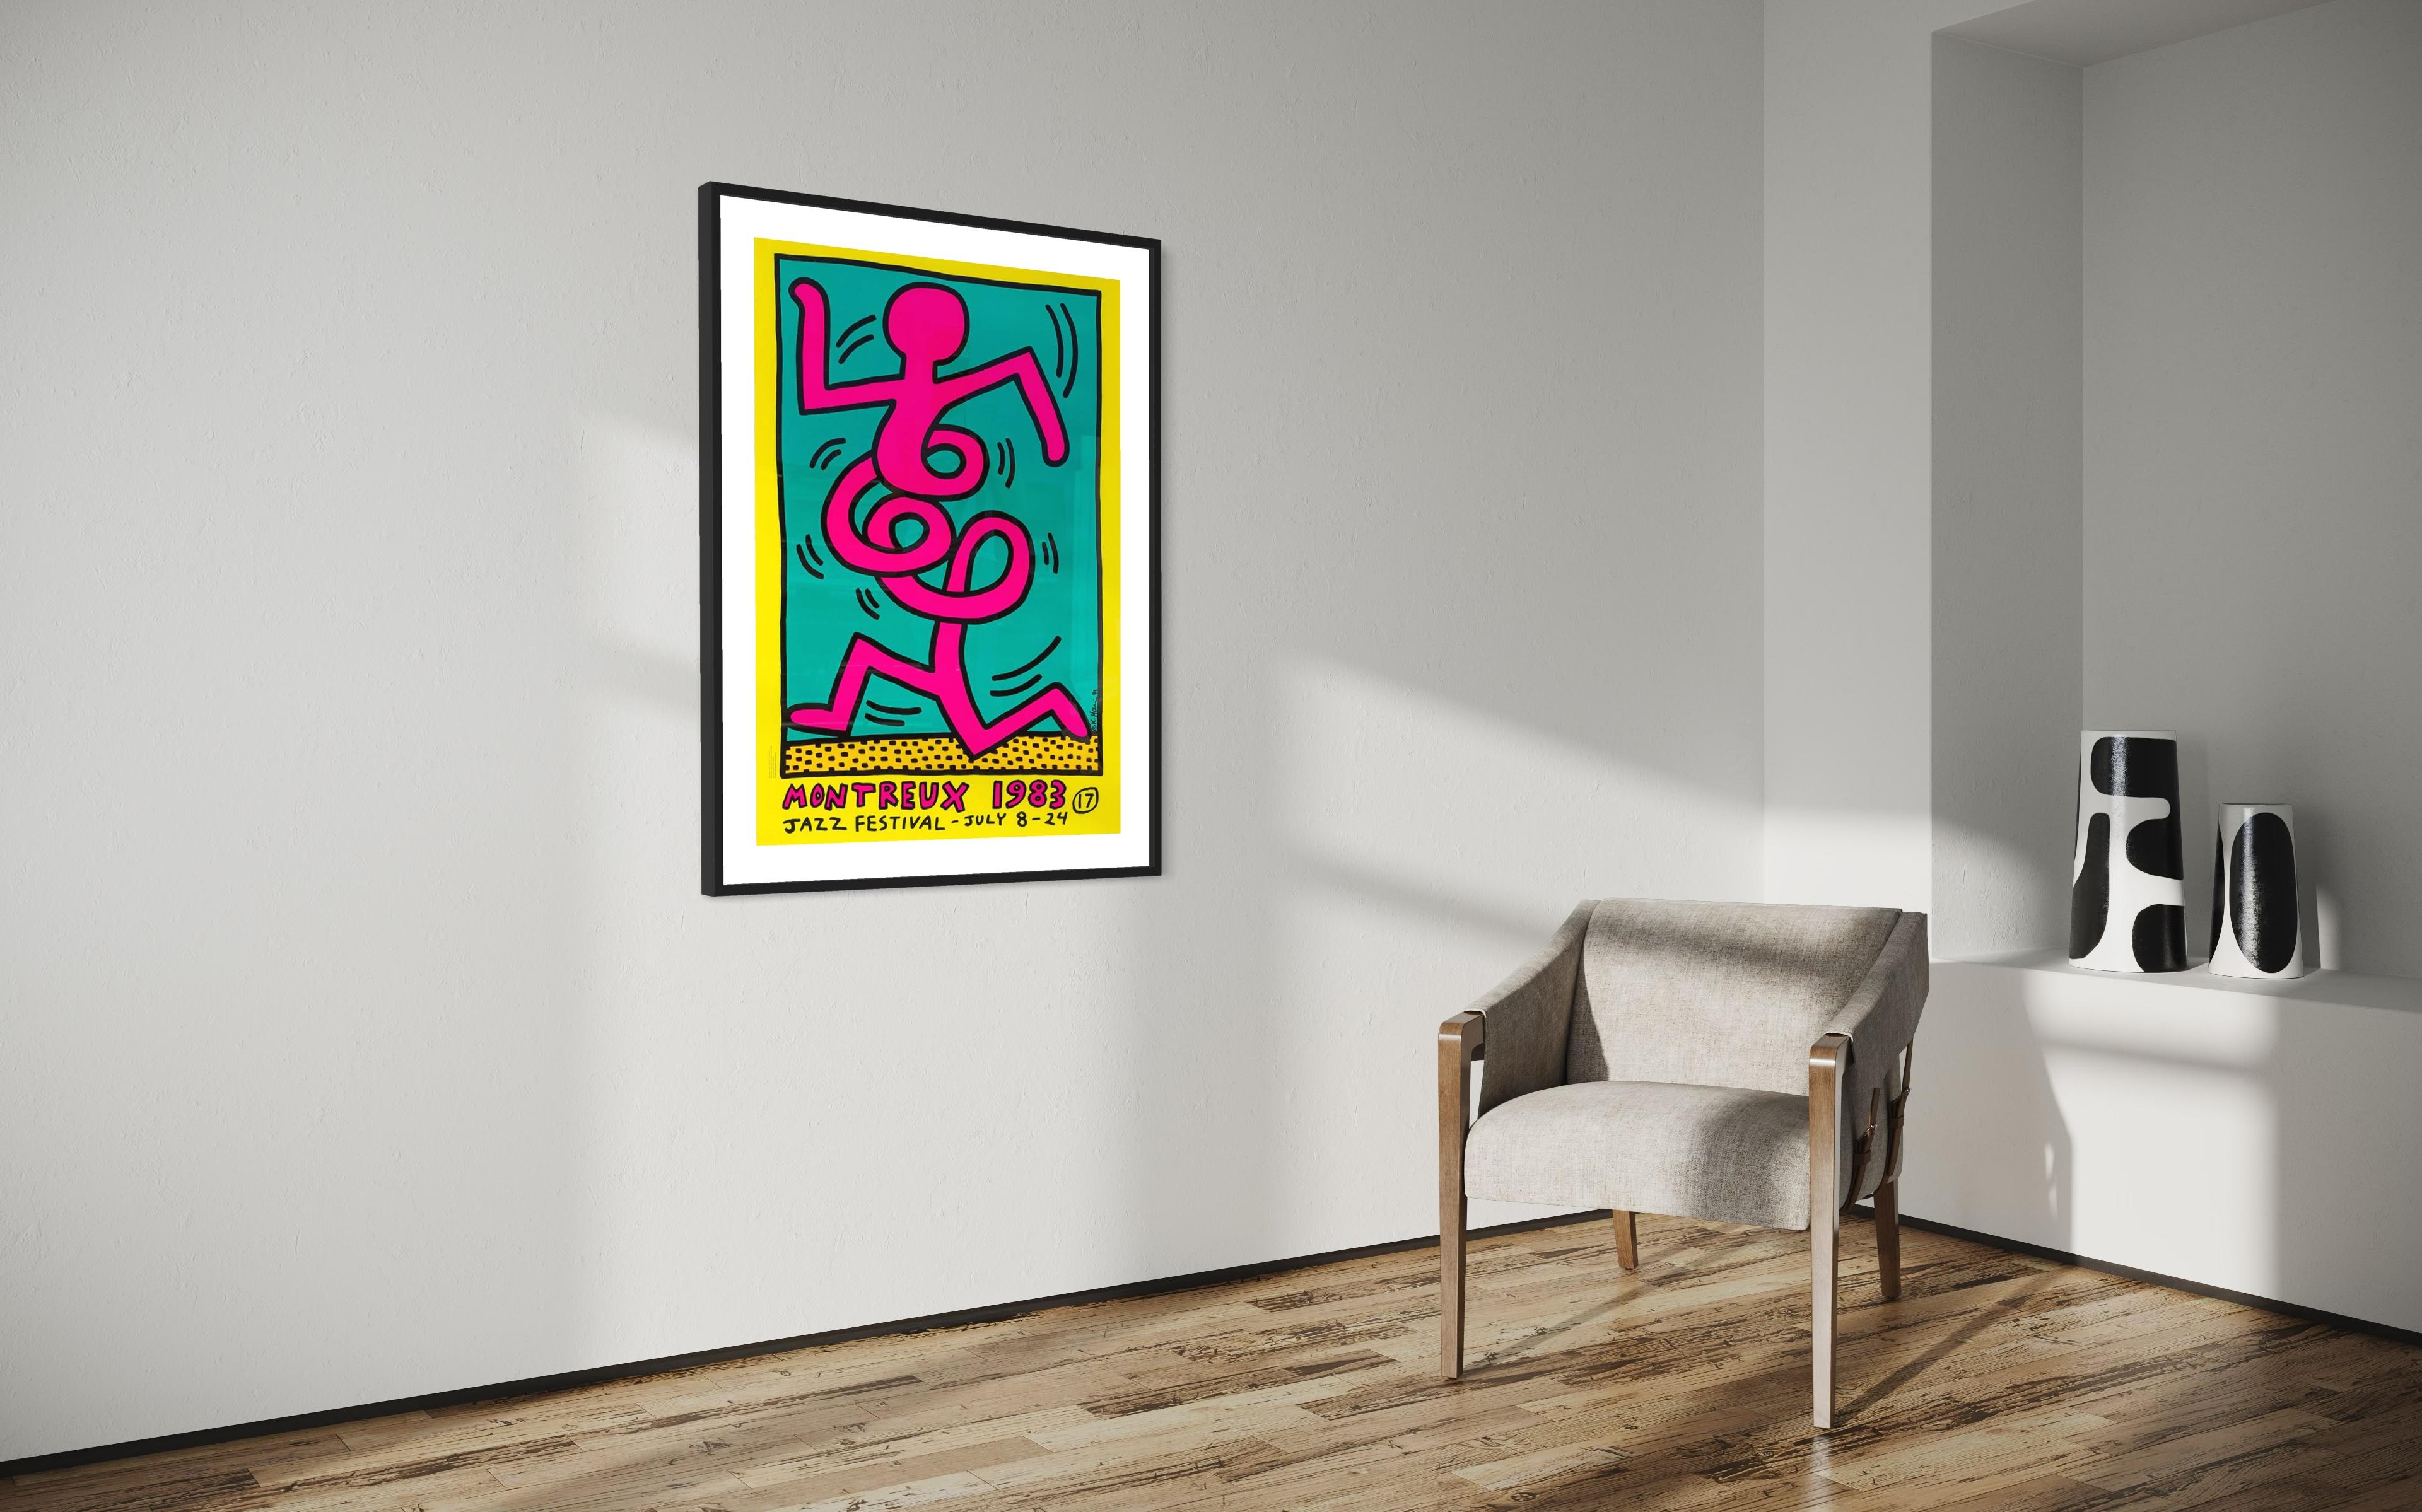 Title: Montreux Jazz Festival 1983 by Keith Haring 1986

Medium: Screenprint in colours on half-matte coated 250 gr paper

Printer: Albin Uldry

Size: 70 x 100 cm (27.6 x 39.4 in)

Signature: Plate signed by Keith Haring 

Open edition

Description: